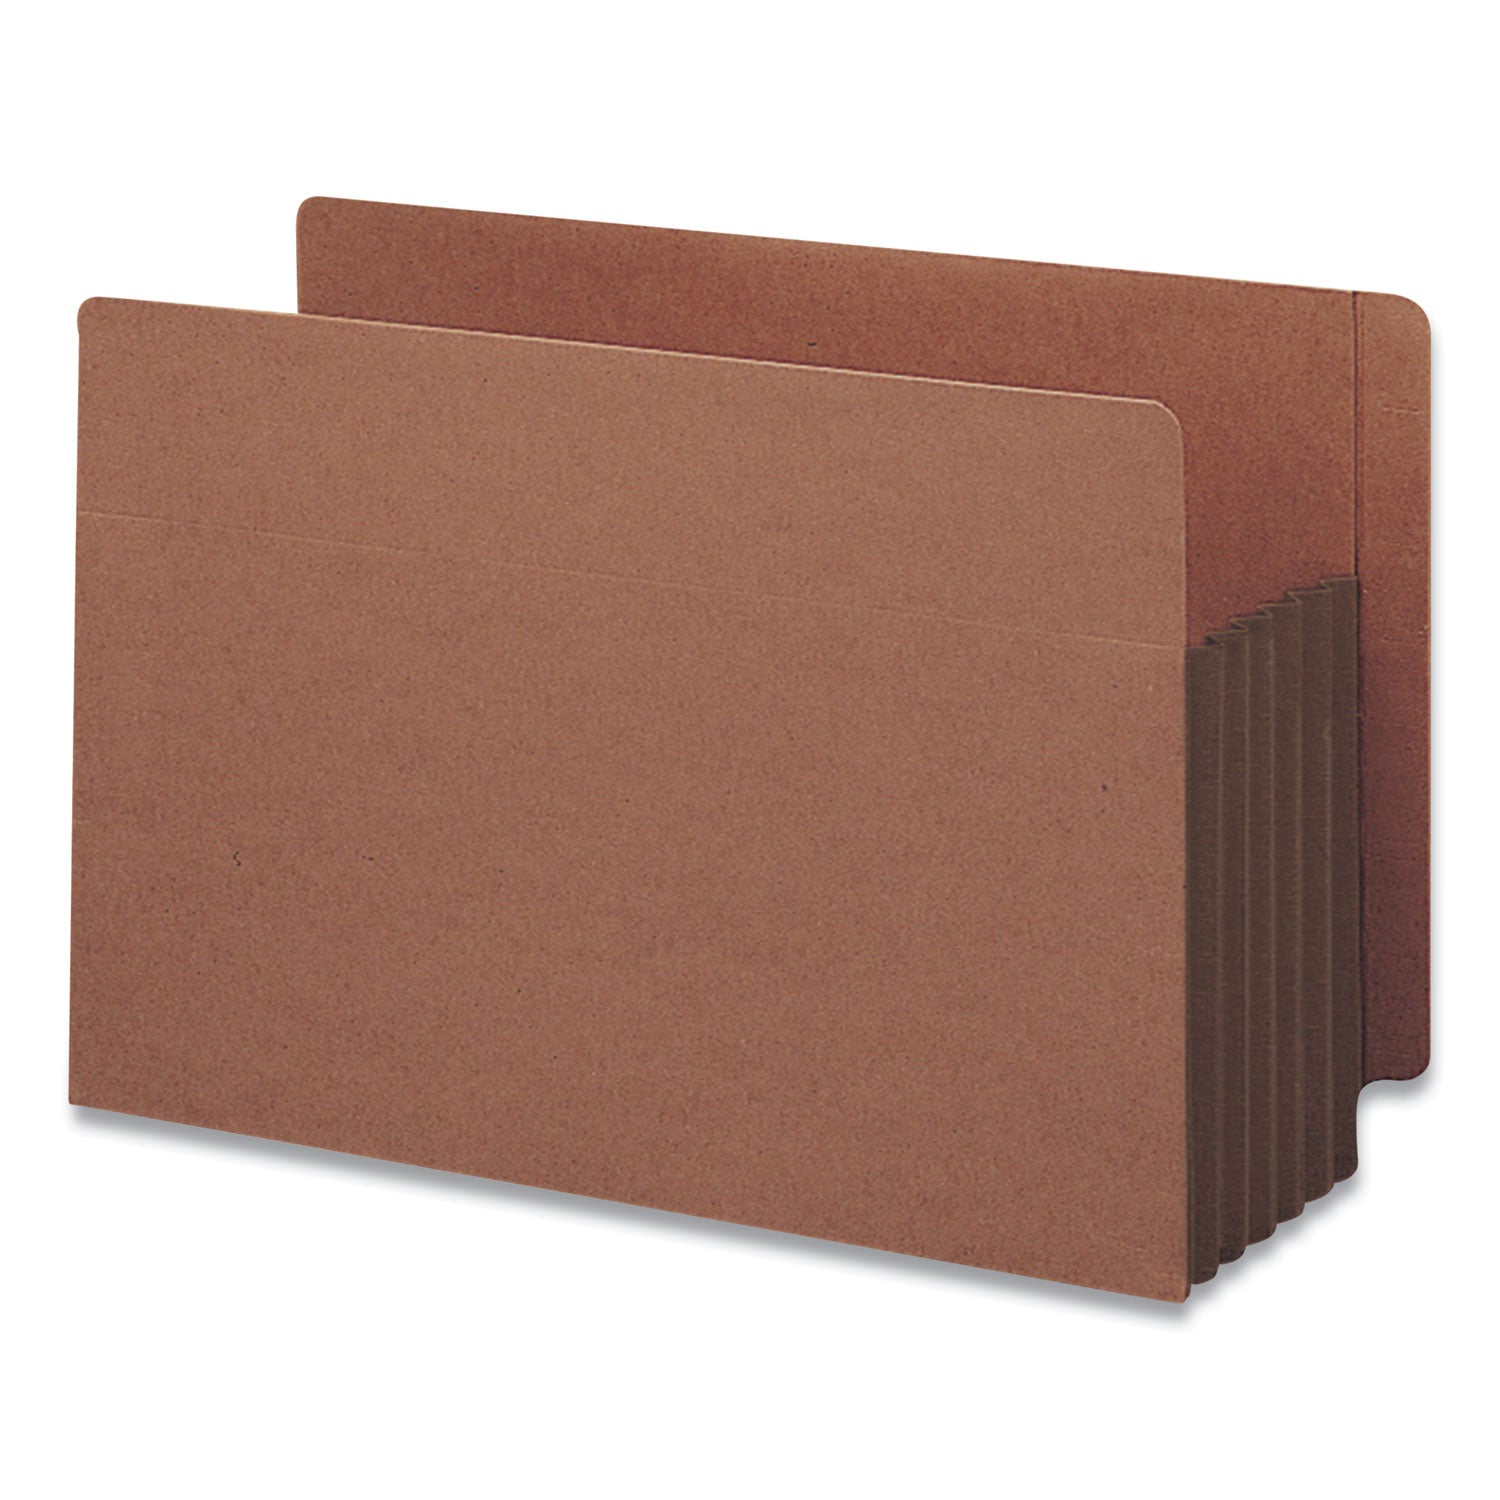 Redrope Drop-Front End Tab File Pockets, Fully Lined 6.5" High Gussets, 5.25" Expansion, Legal Size, Redrope/Brown, 10/Box - 